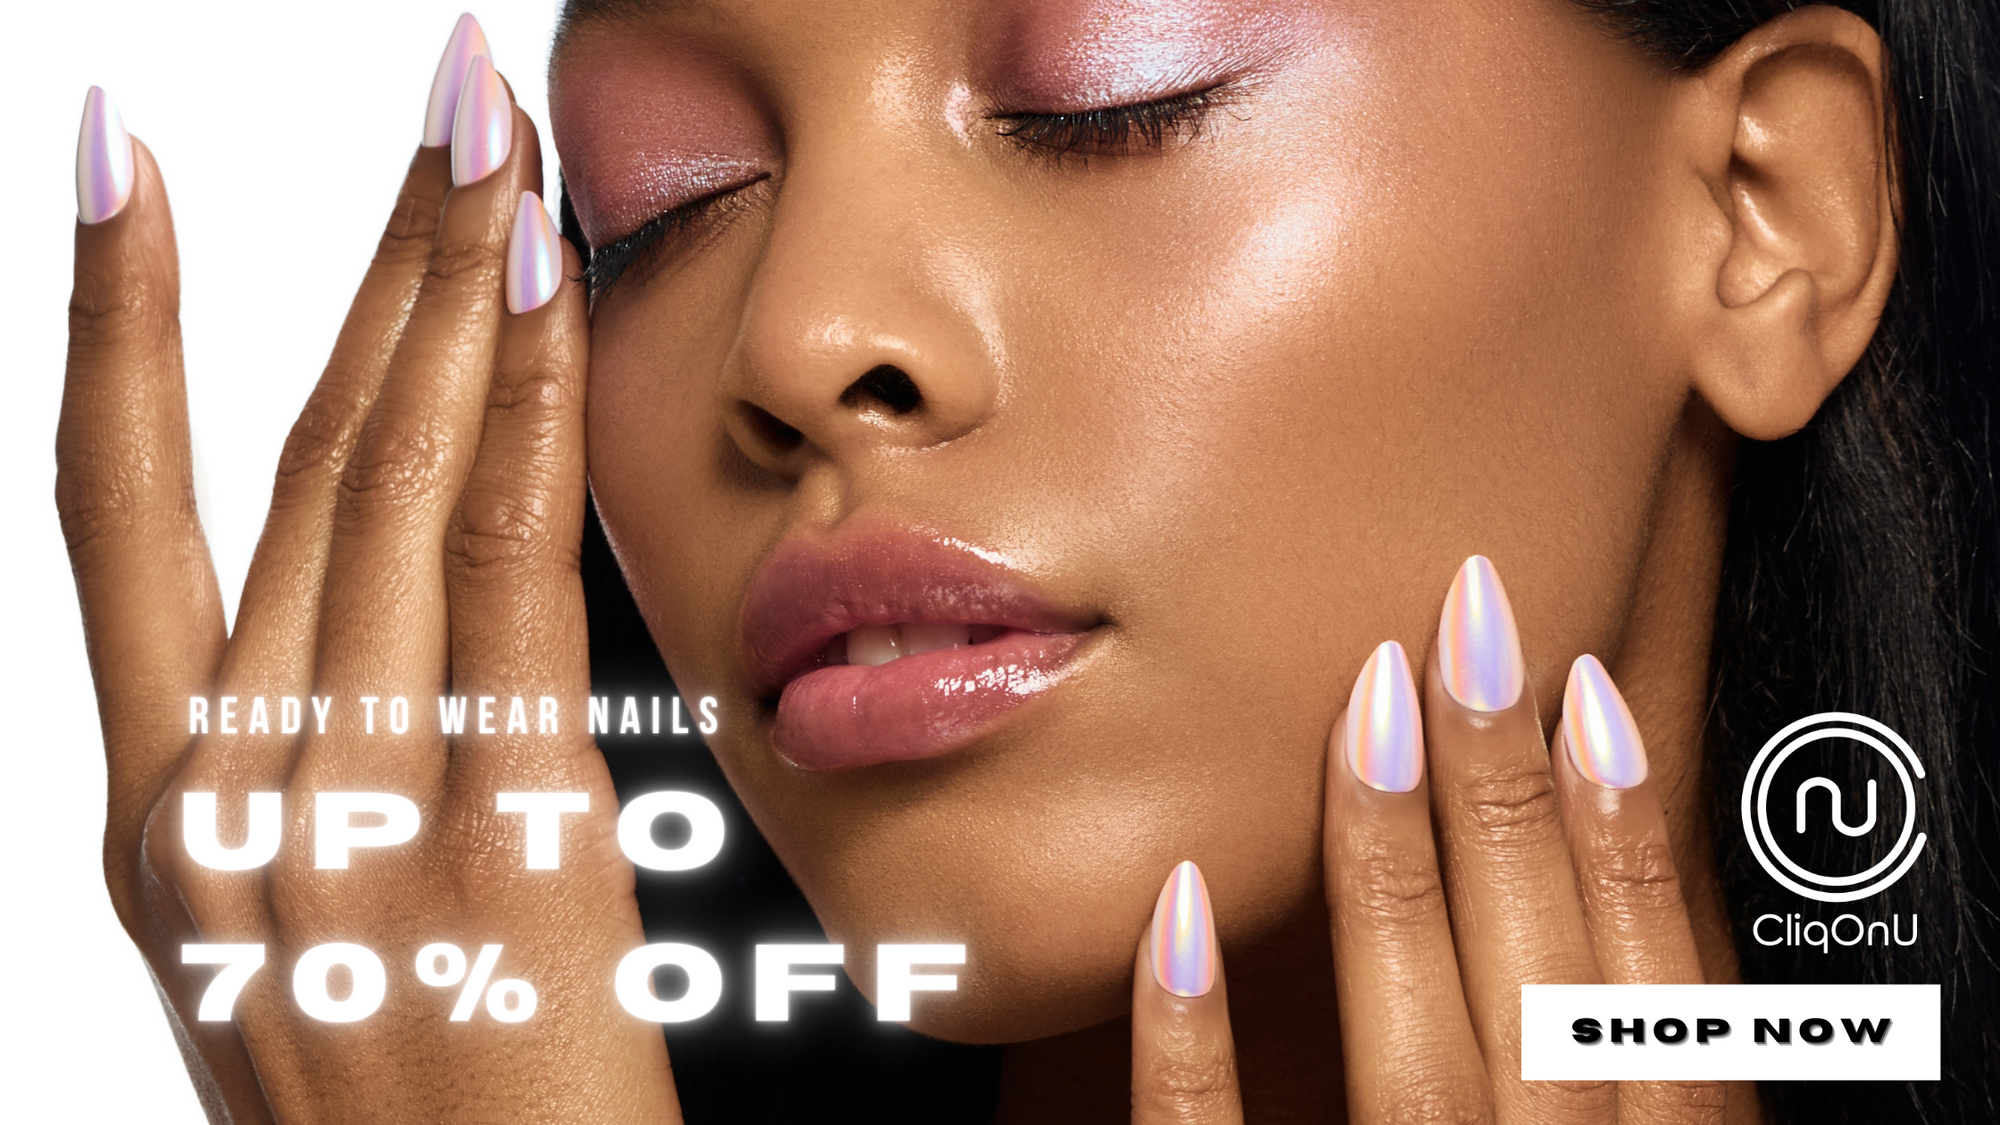 Cliqonu Press On Nails Sale Up to 70% off